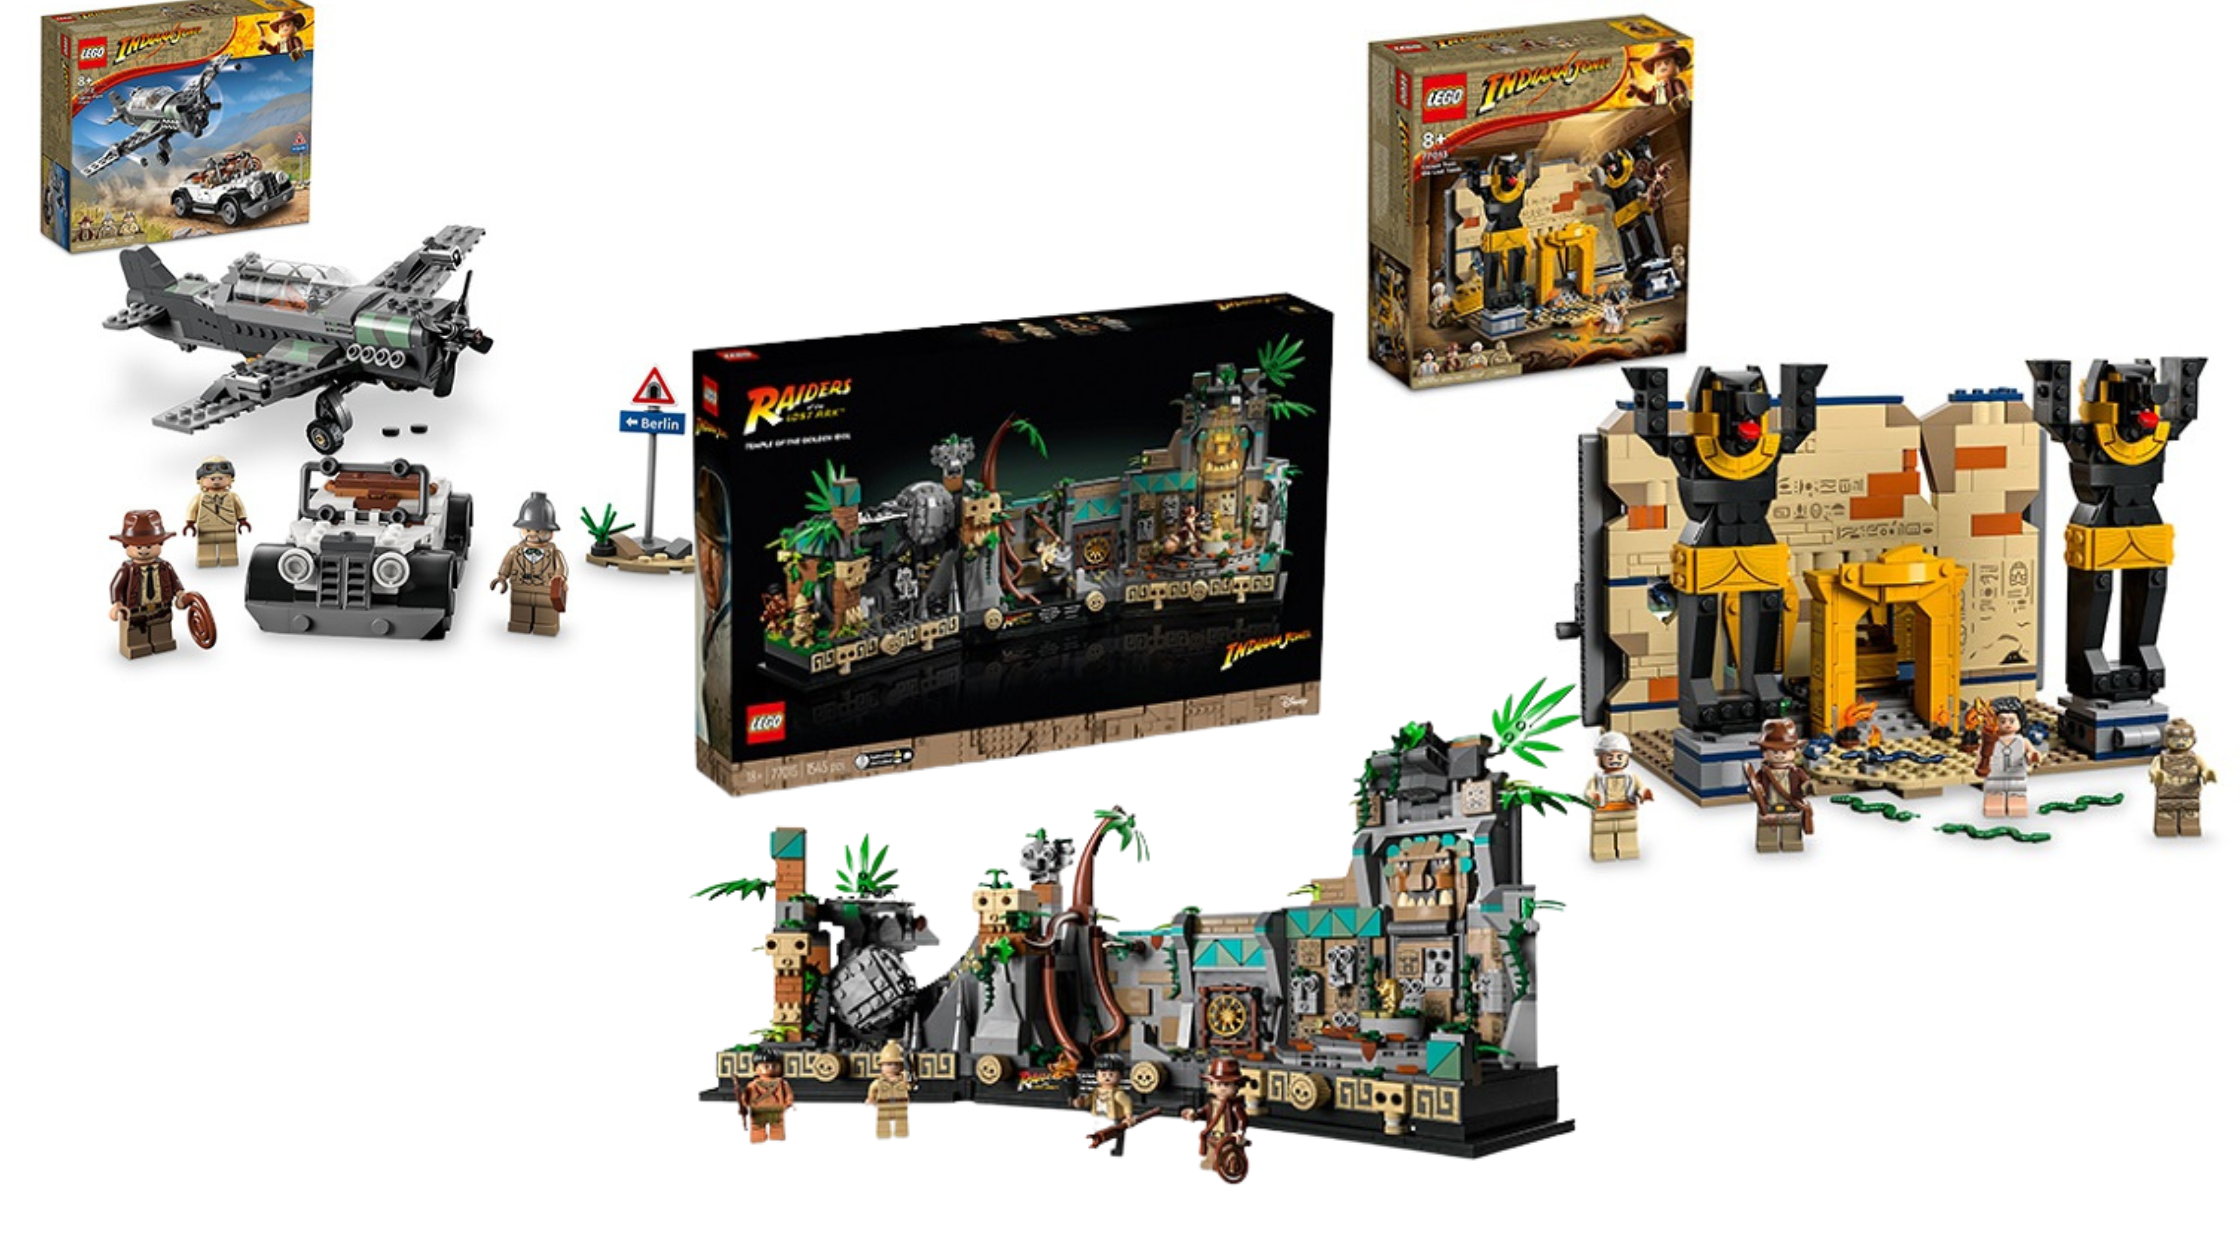 LEGO Releases First INDIANA JONES Sets in Over a Decade - Nerdist